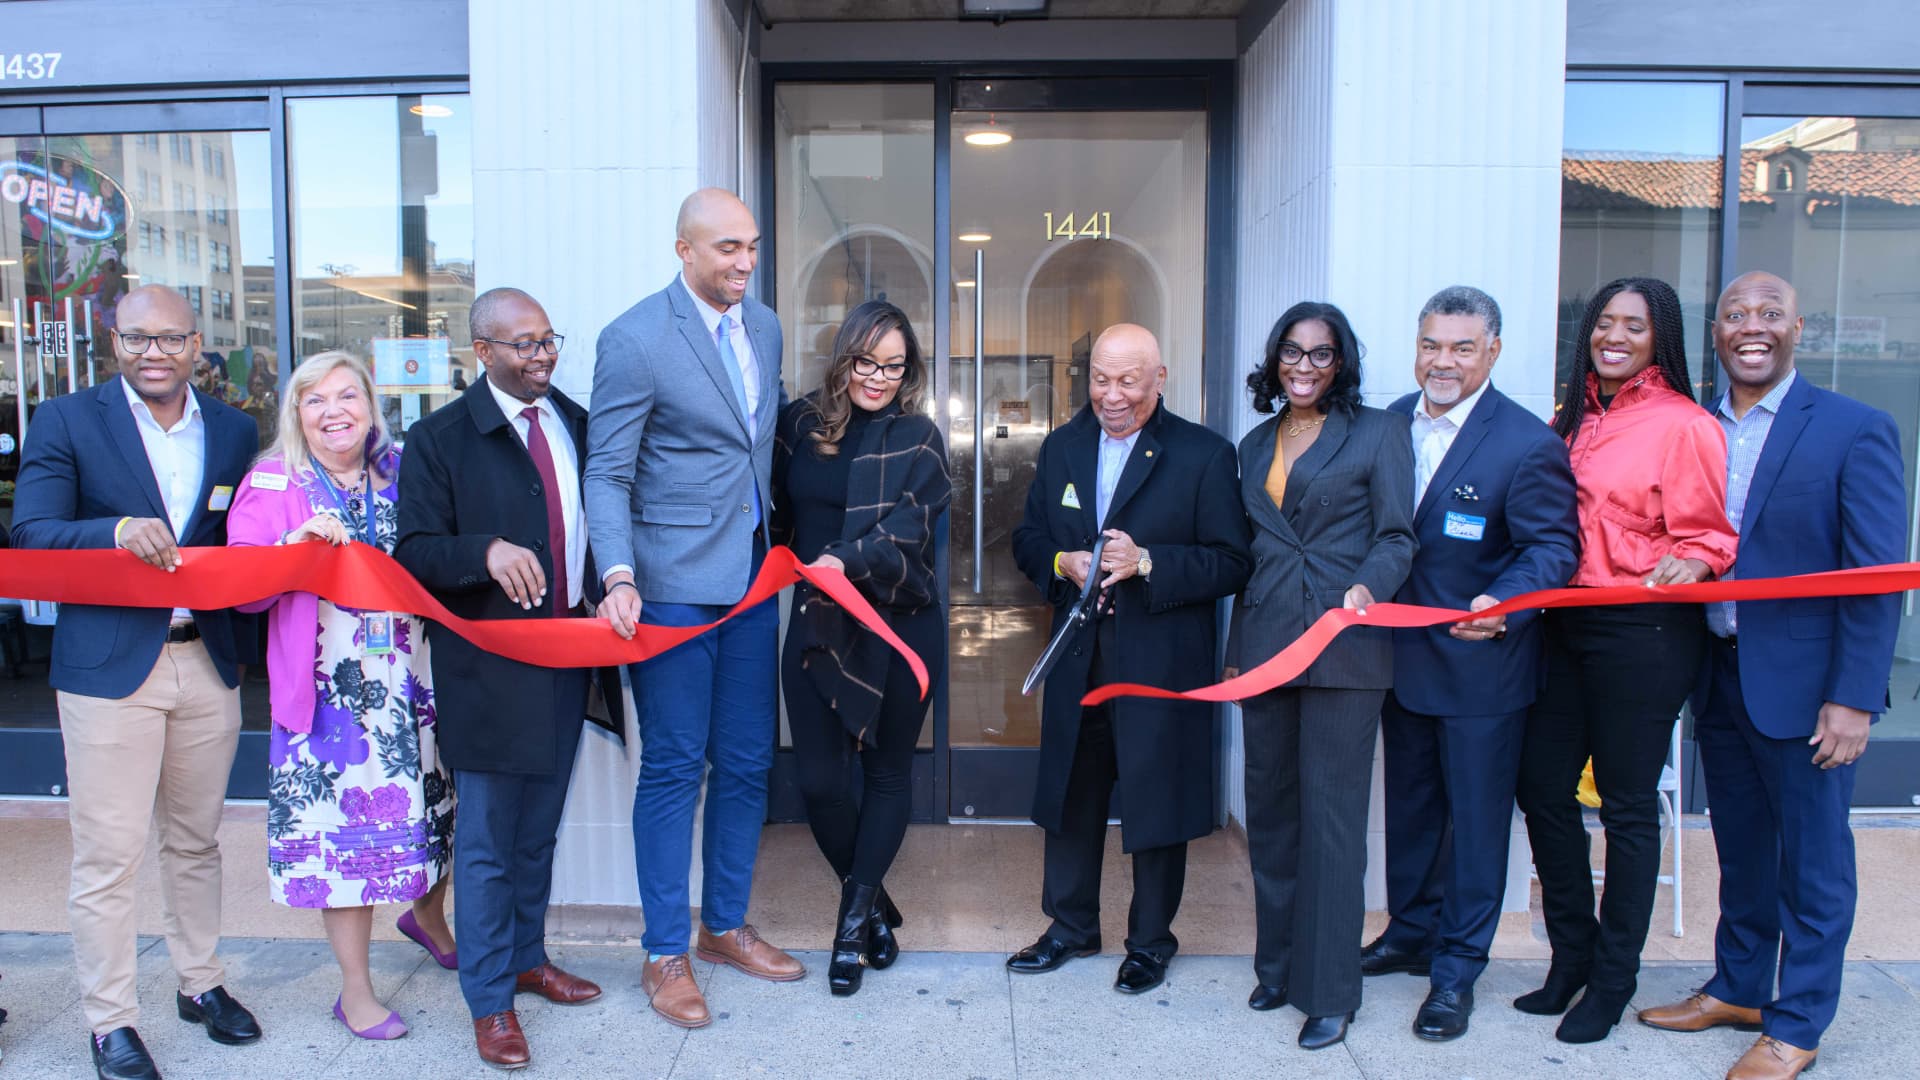 Ribbon cutting ceremony at The Hidden Genius Project's new headquarters in Oakland, California.